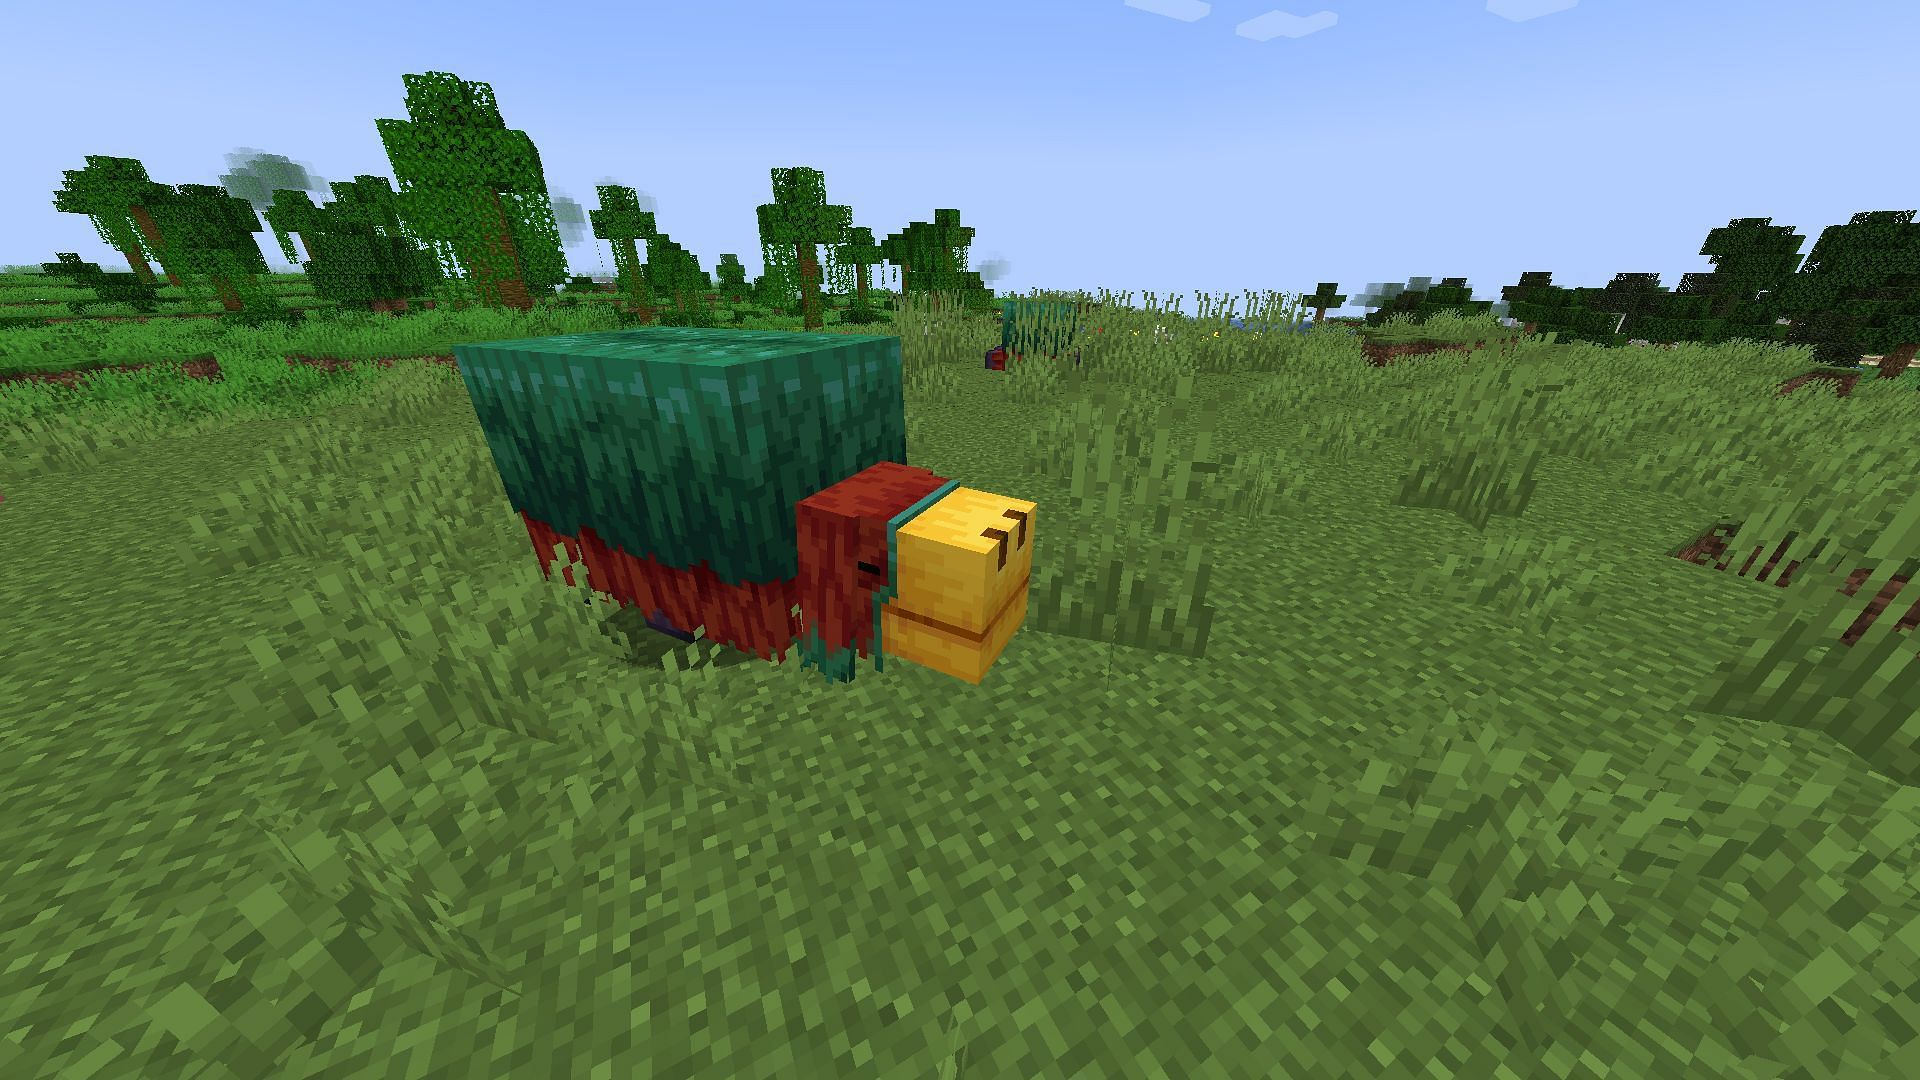 Sniffer, the first mob vote candidate of 2022, was announced around two weeks before Minecraft Live (Image via Mojang)